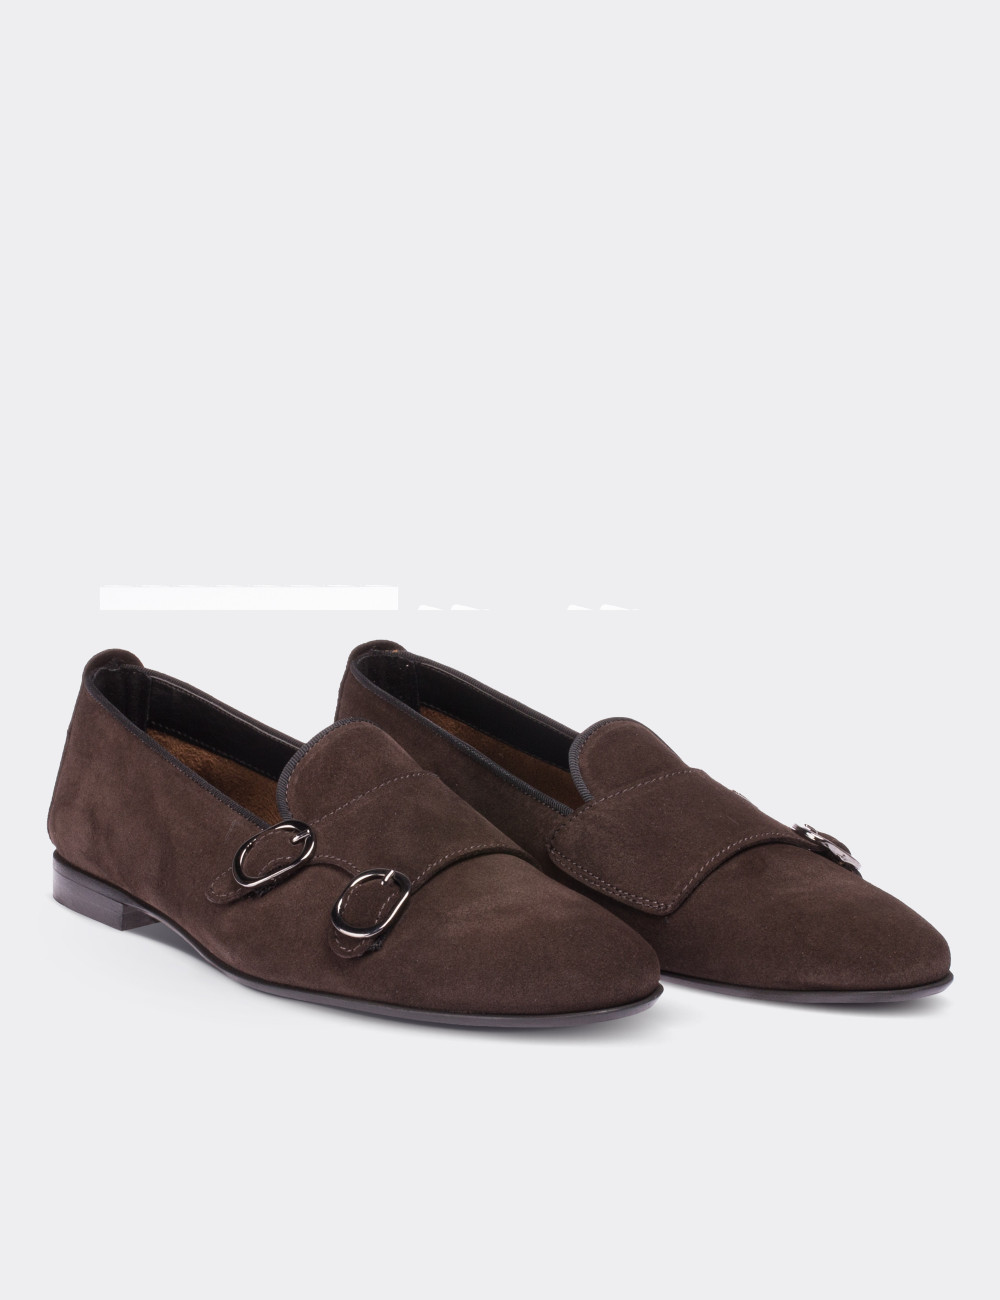 Brown Suede Leather Loafers - 01611ZKHVM03